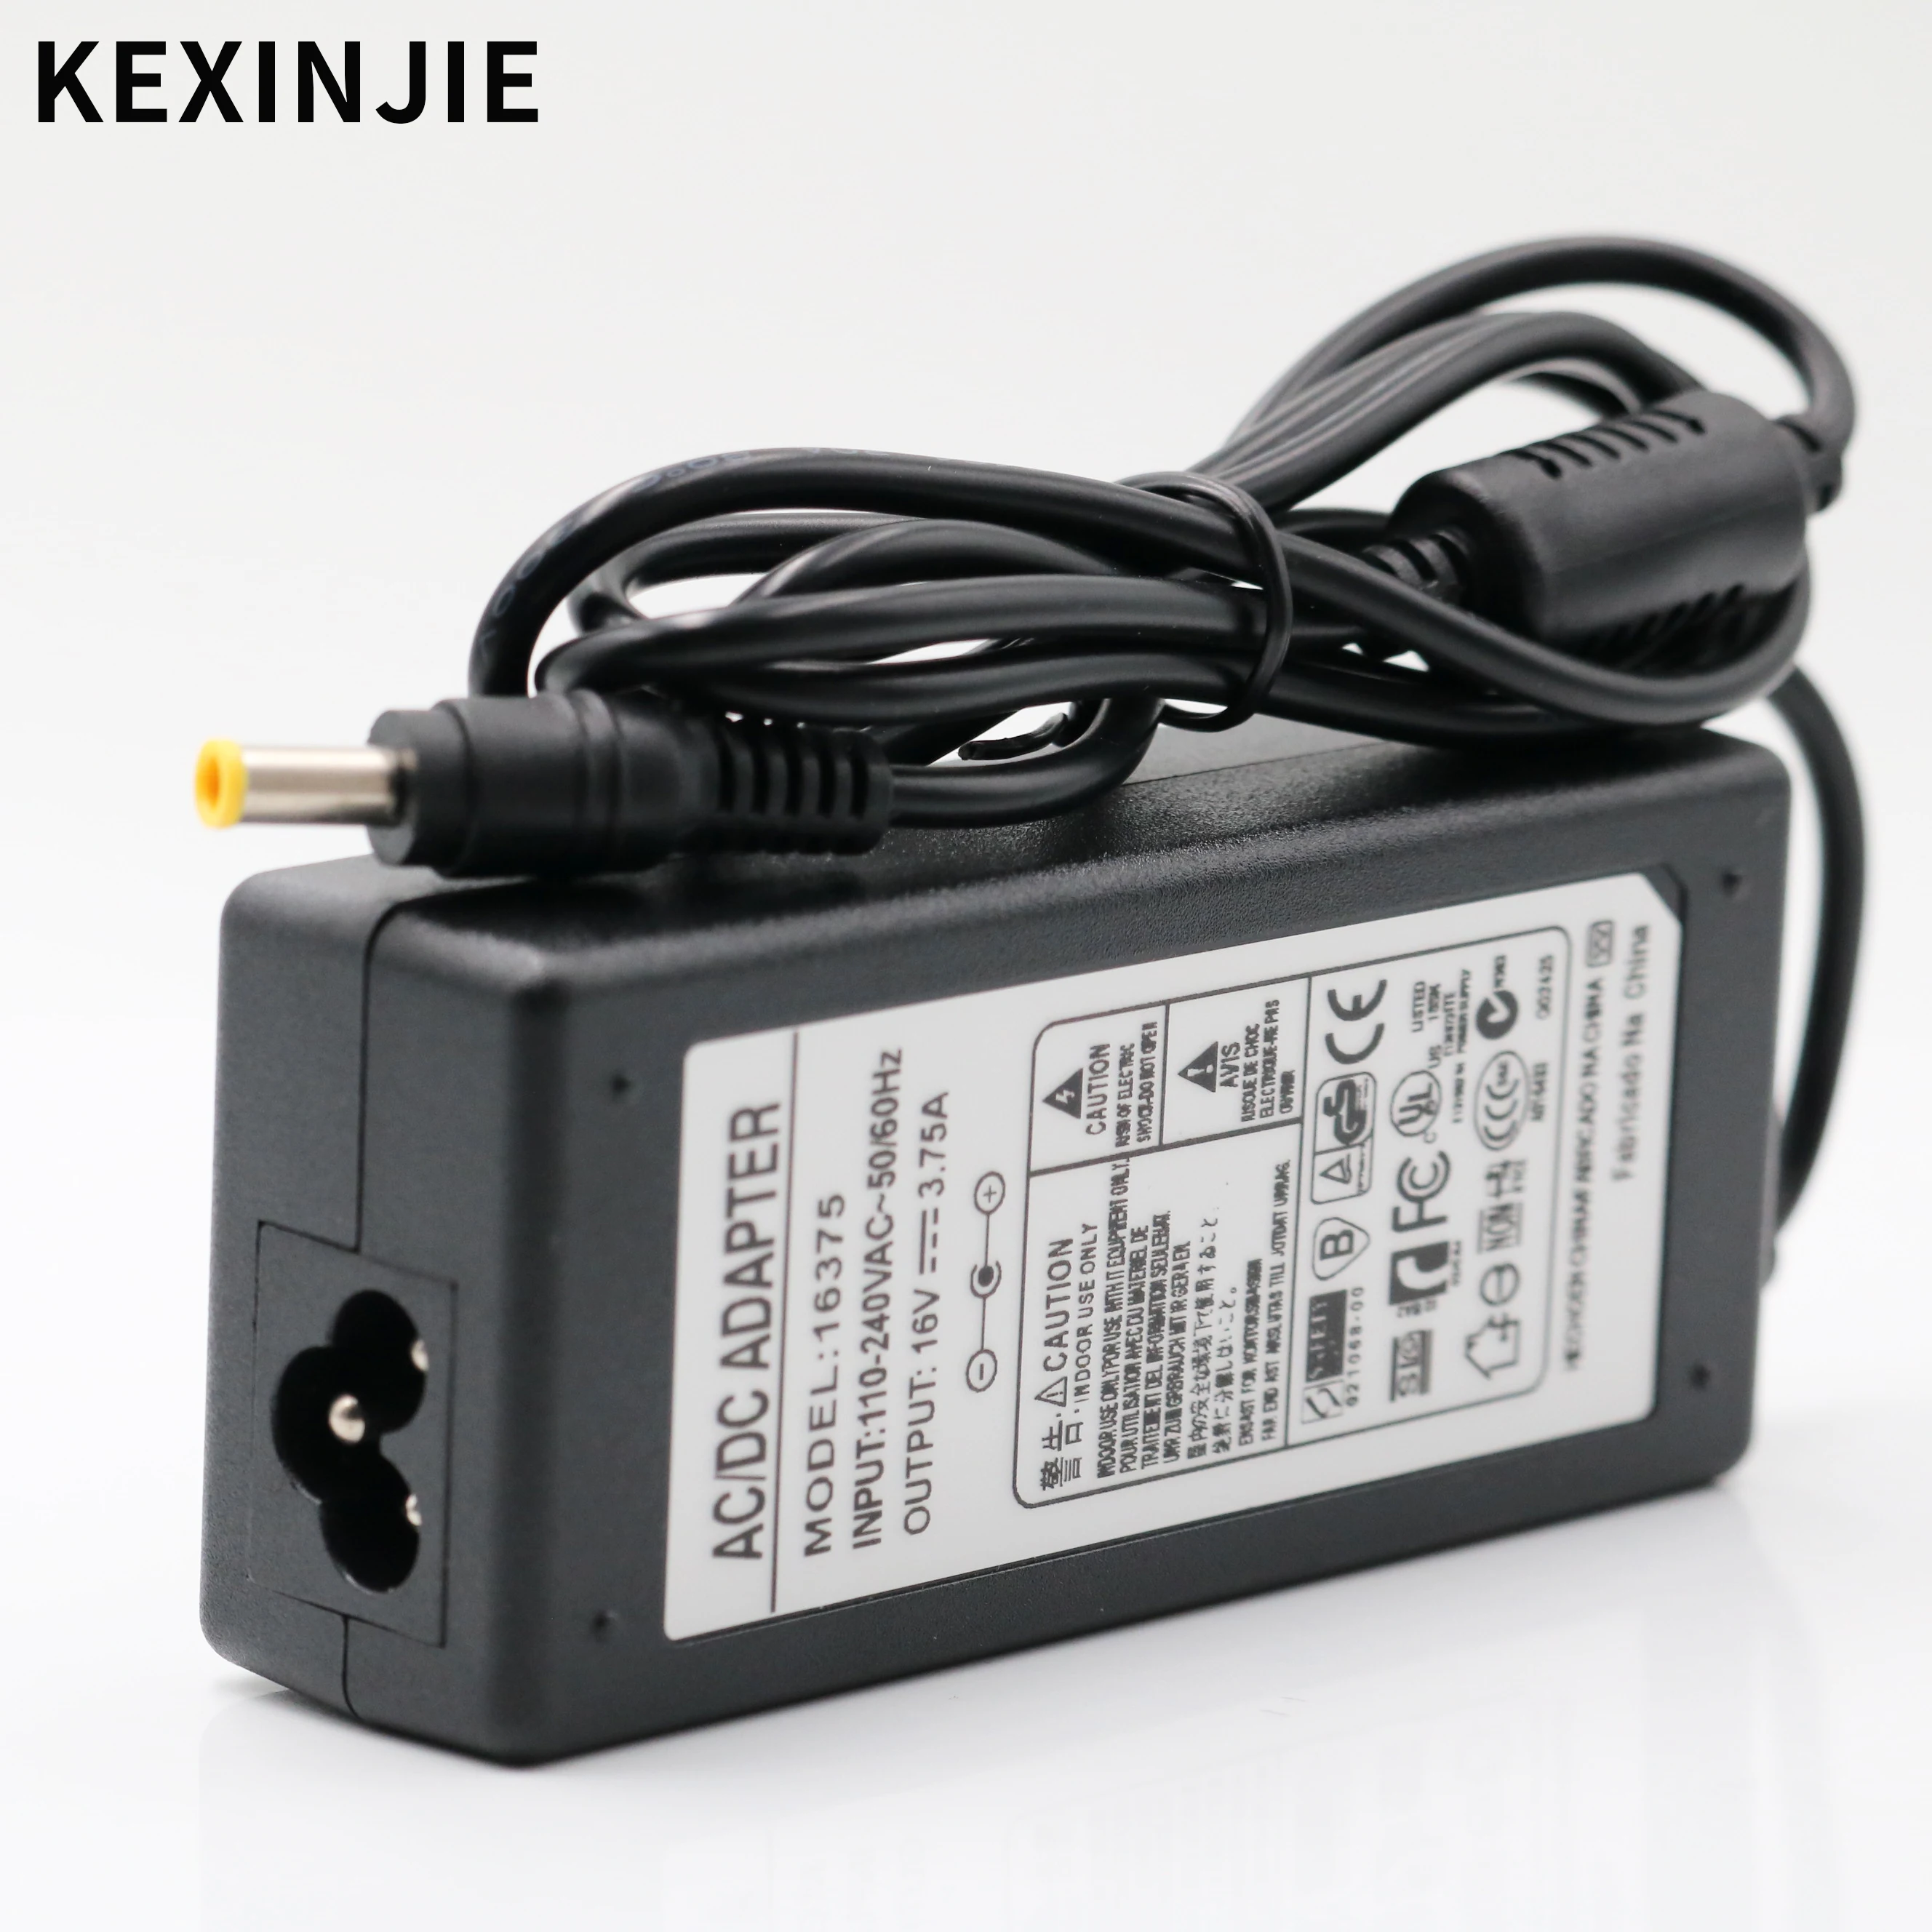 

16V 3.75A 60W For Samsung Fujitsu Sony Laptop Power Adapter Charger 5.5*3.0mm